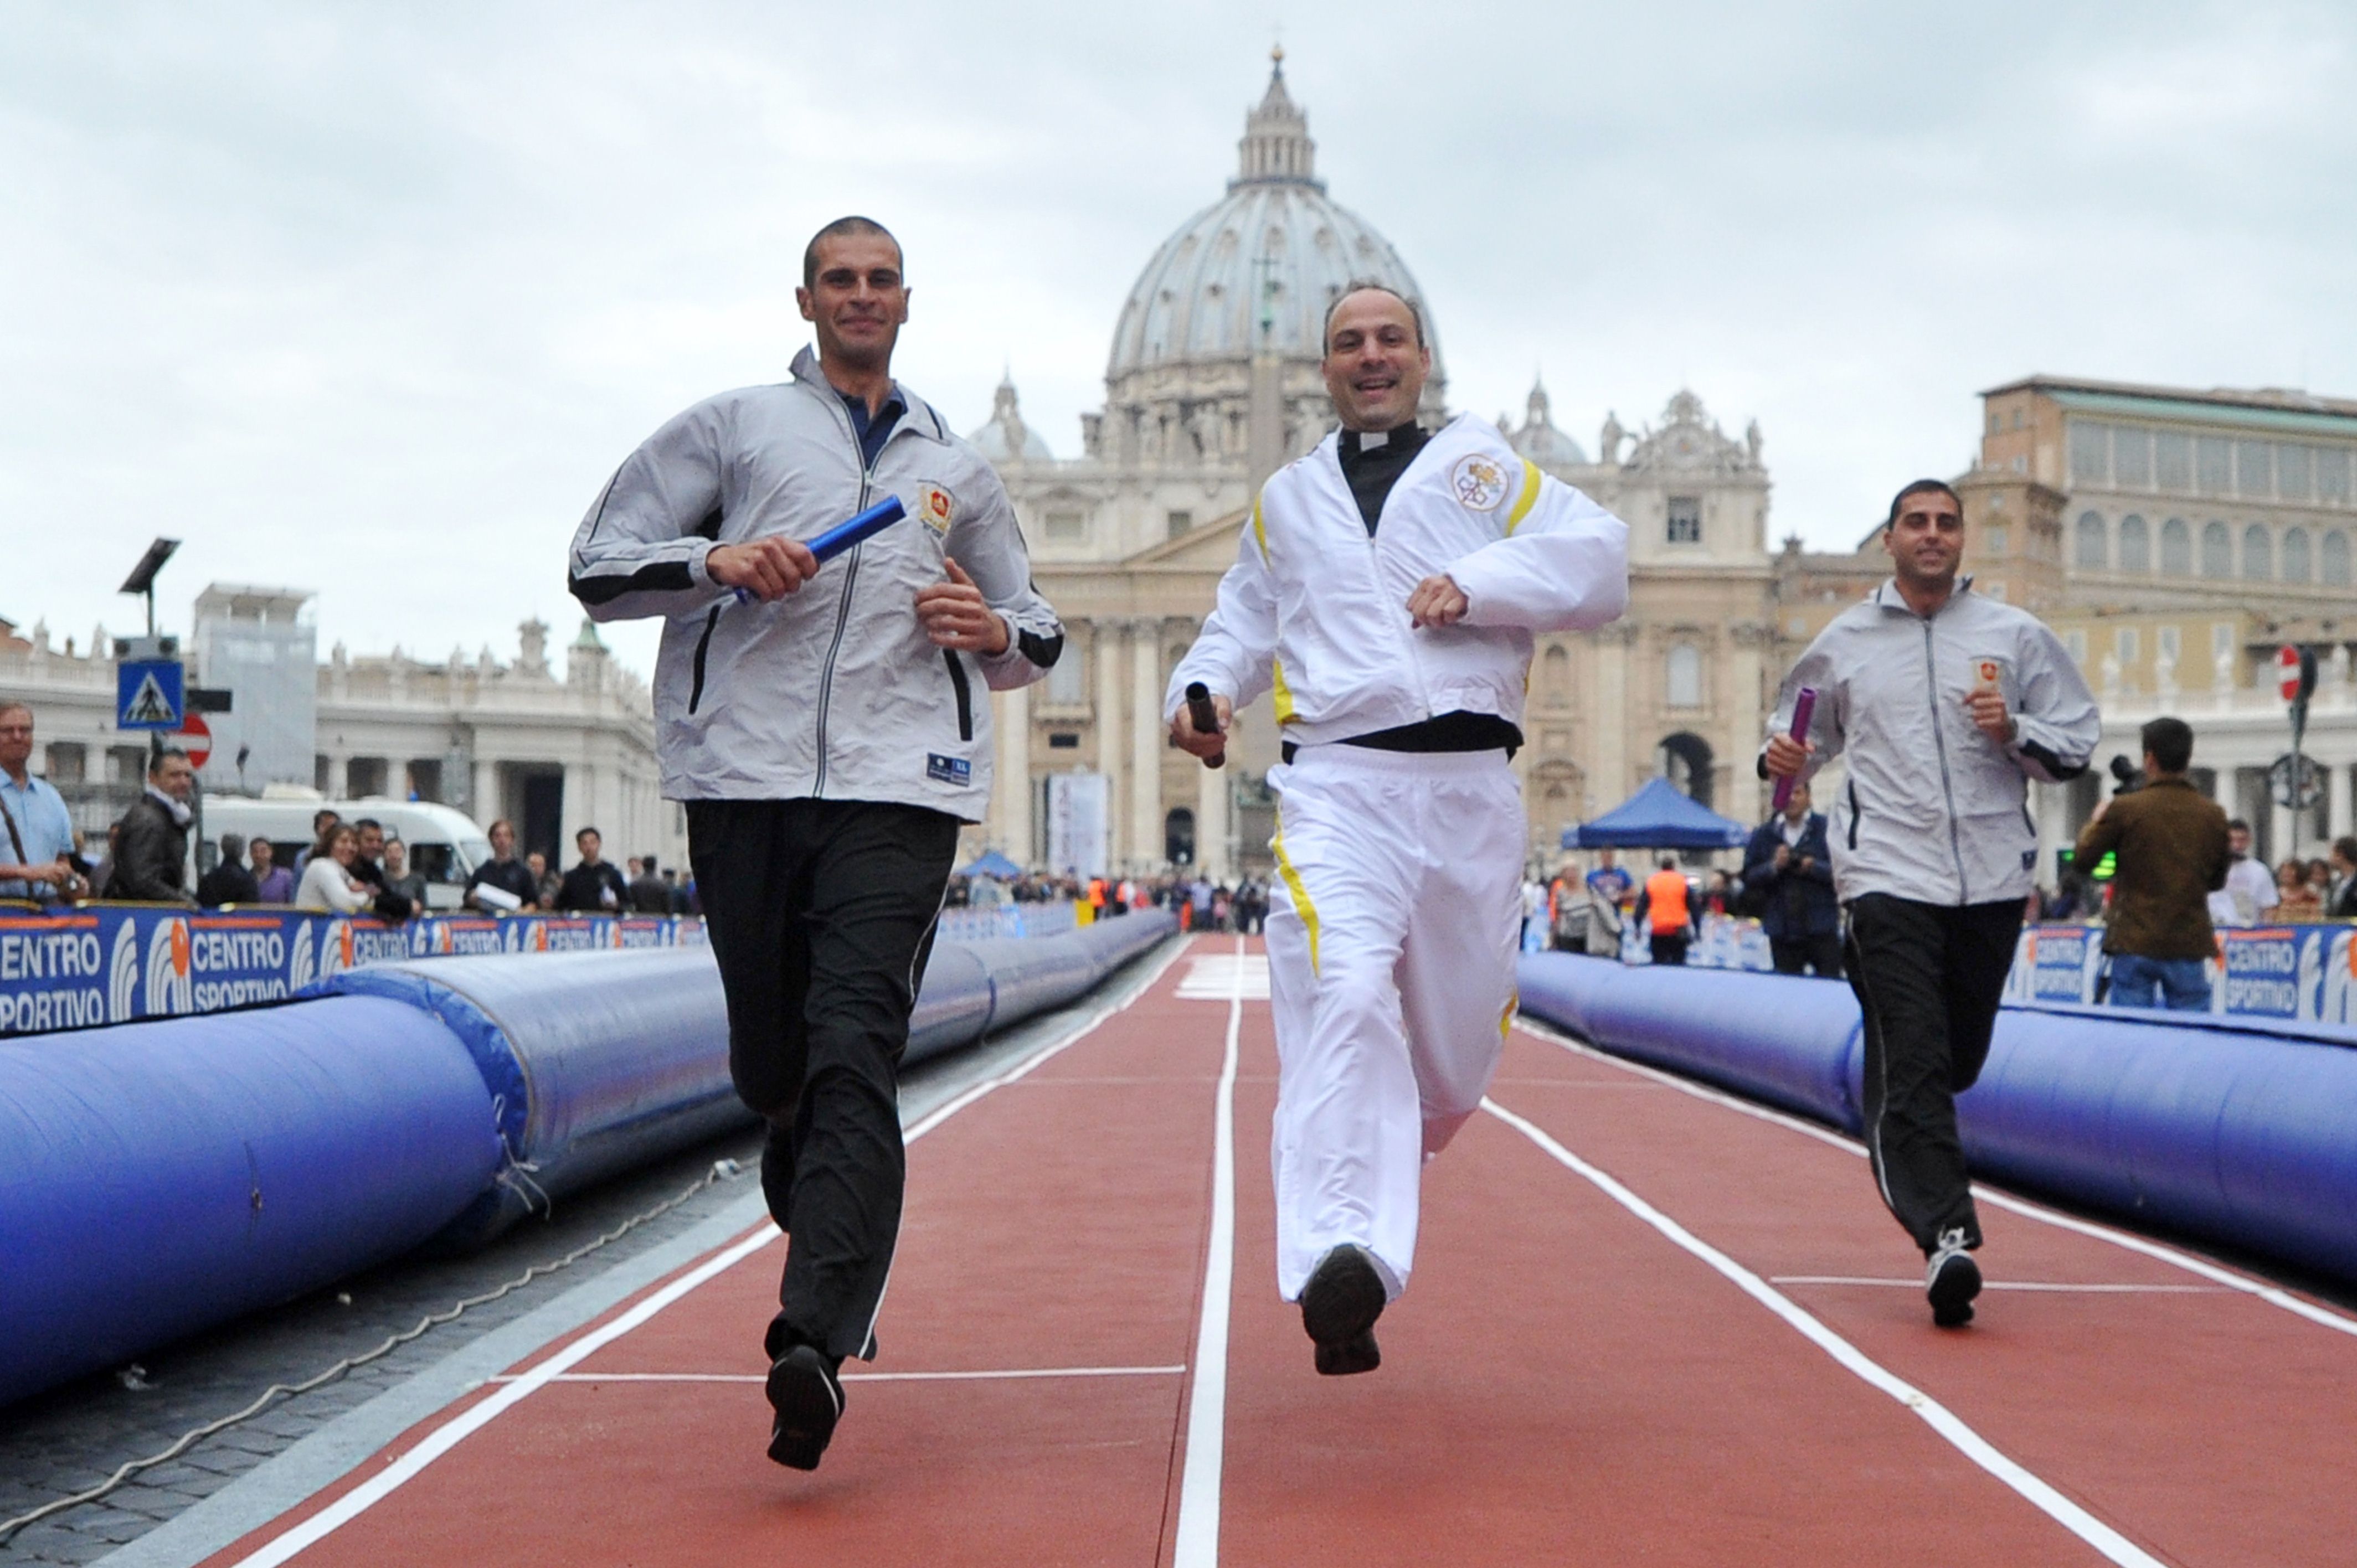 Competitors take part in a "Race of Faith" in St Peter's Square at the Vatican on Sunday. Photo: AFP 